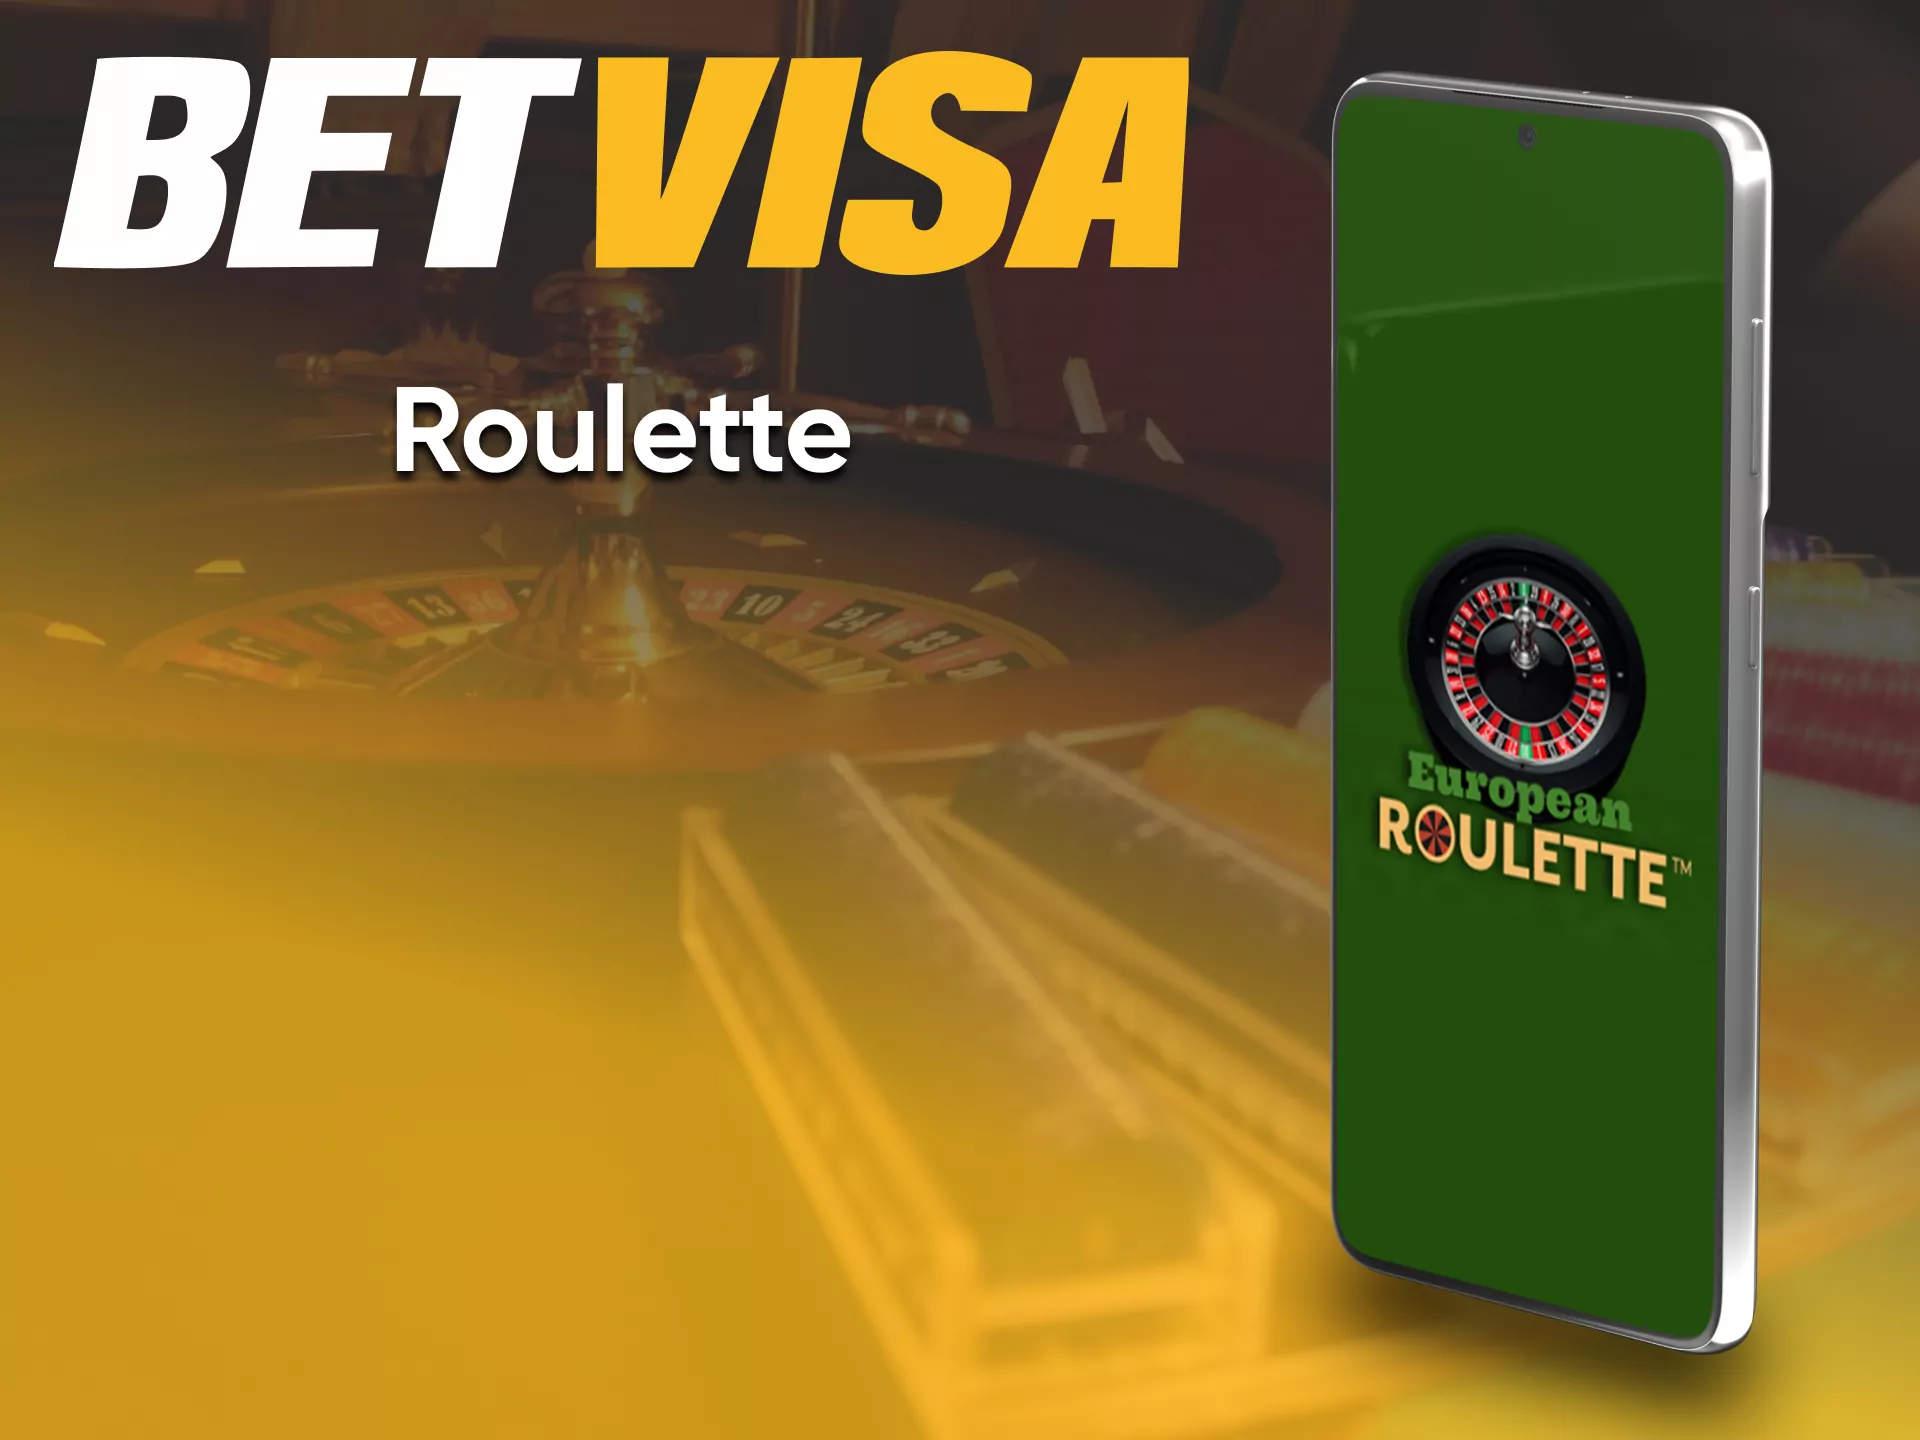 Roulette games are highly presented in the BetVisa, app.